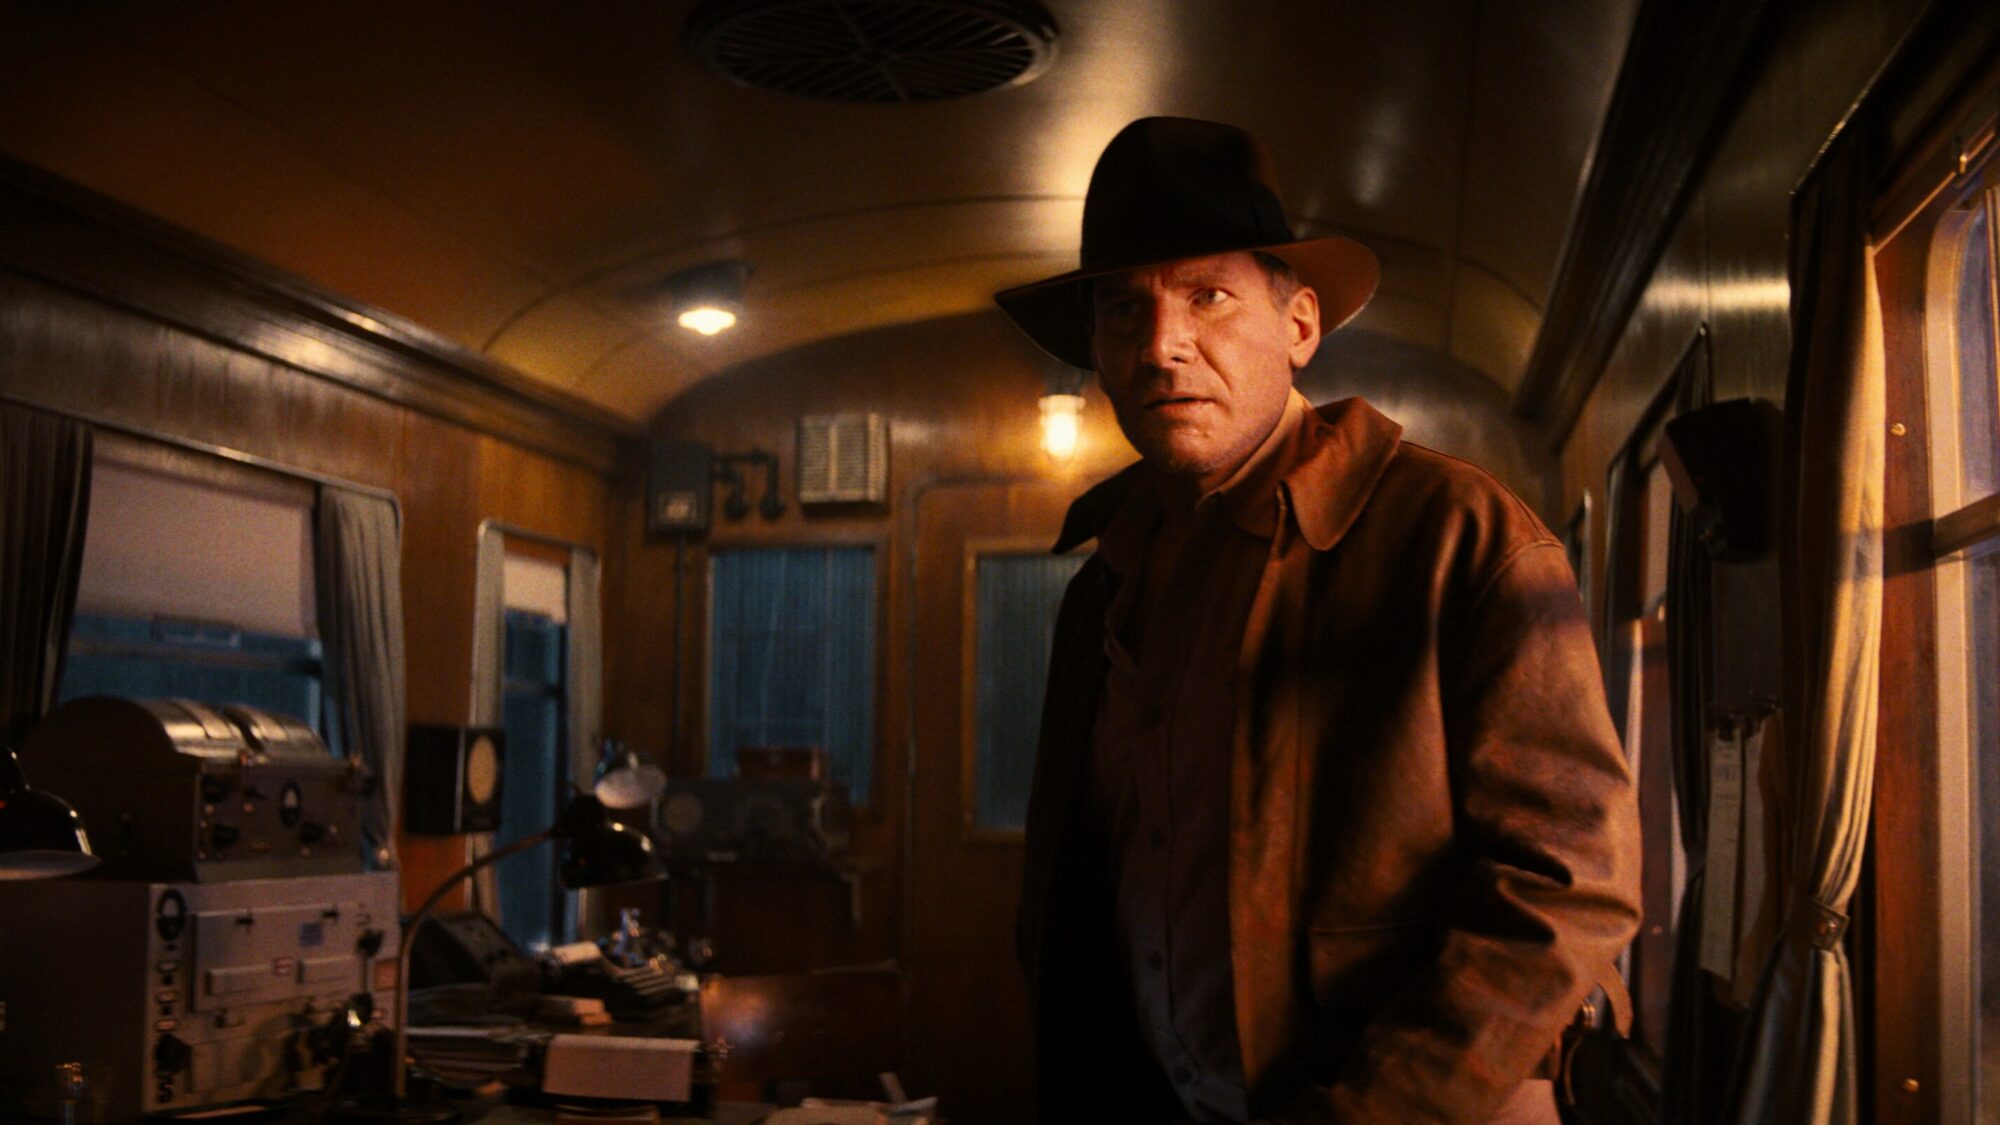 Image name harrison ford indiana jones on train dial of destiny the 29 image from the post Visit the Yorkshire railway used in the new film: Indiana Jones and the Dial of Destiny in Yorkshire.com.